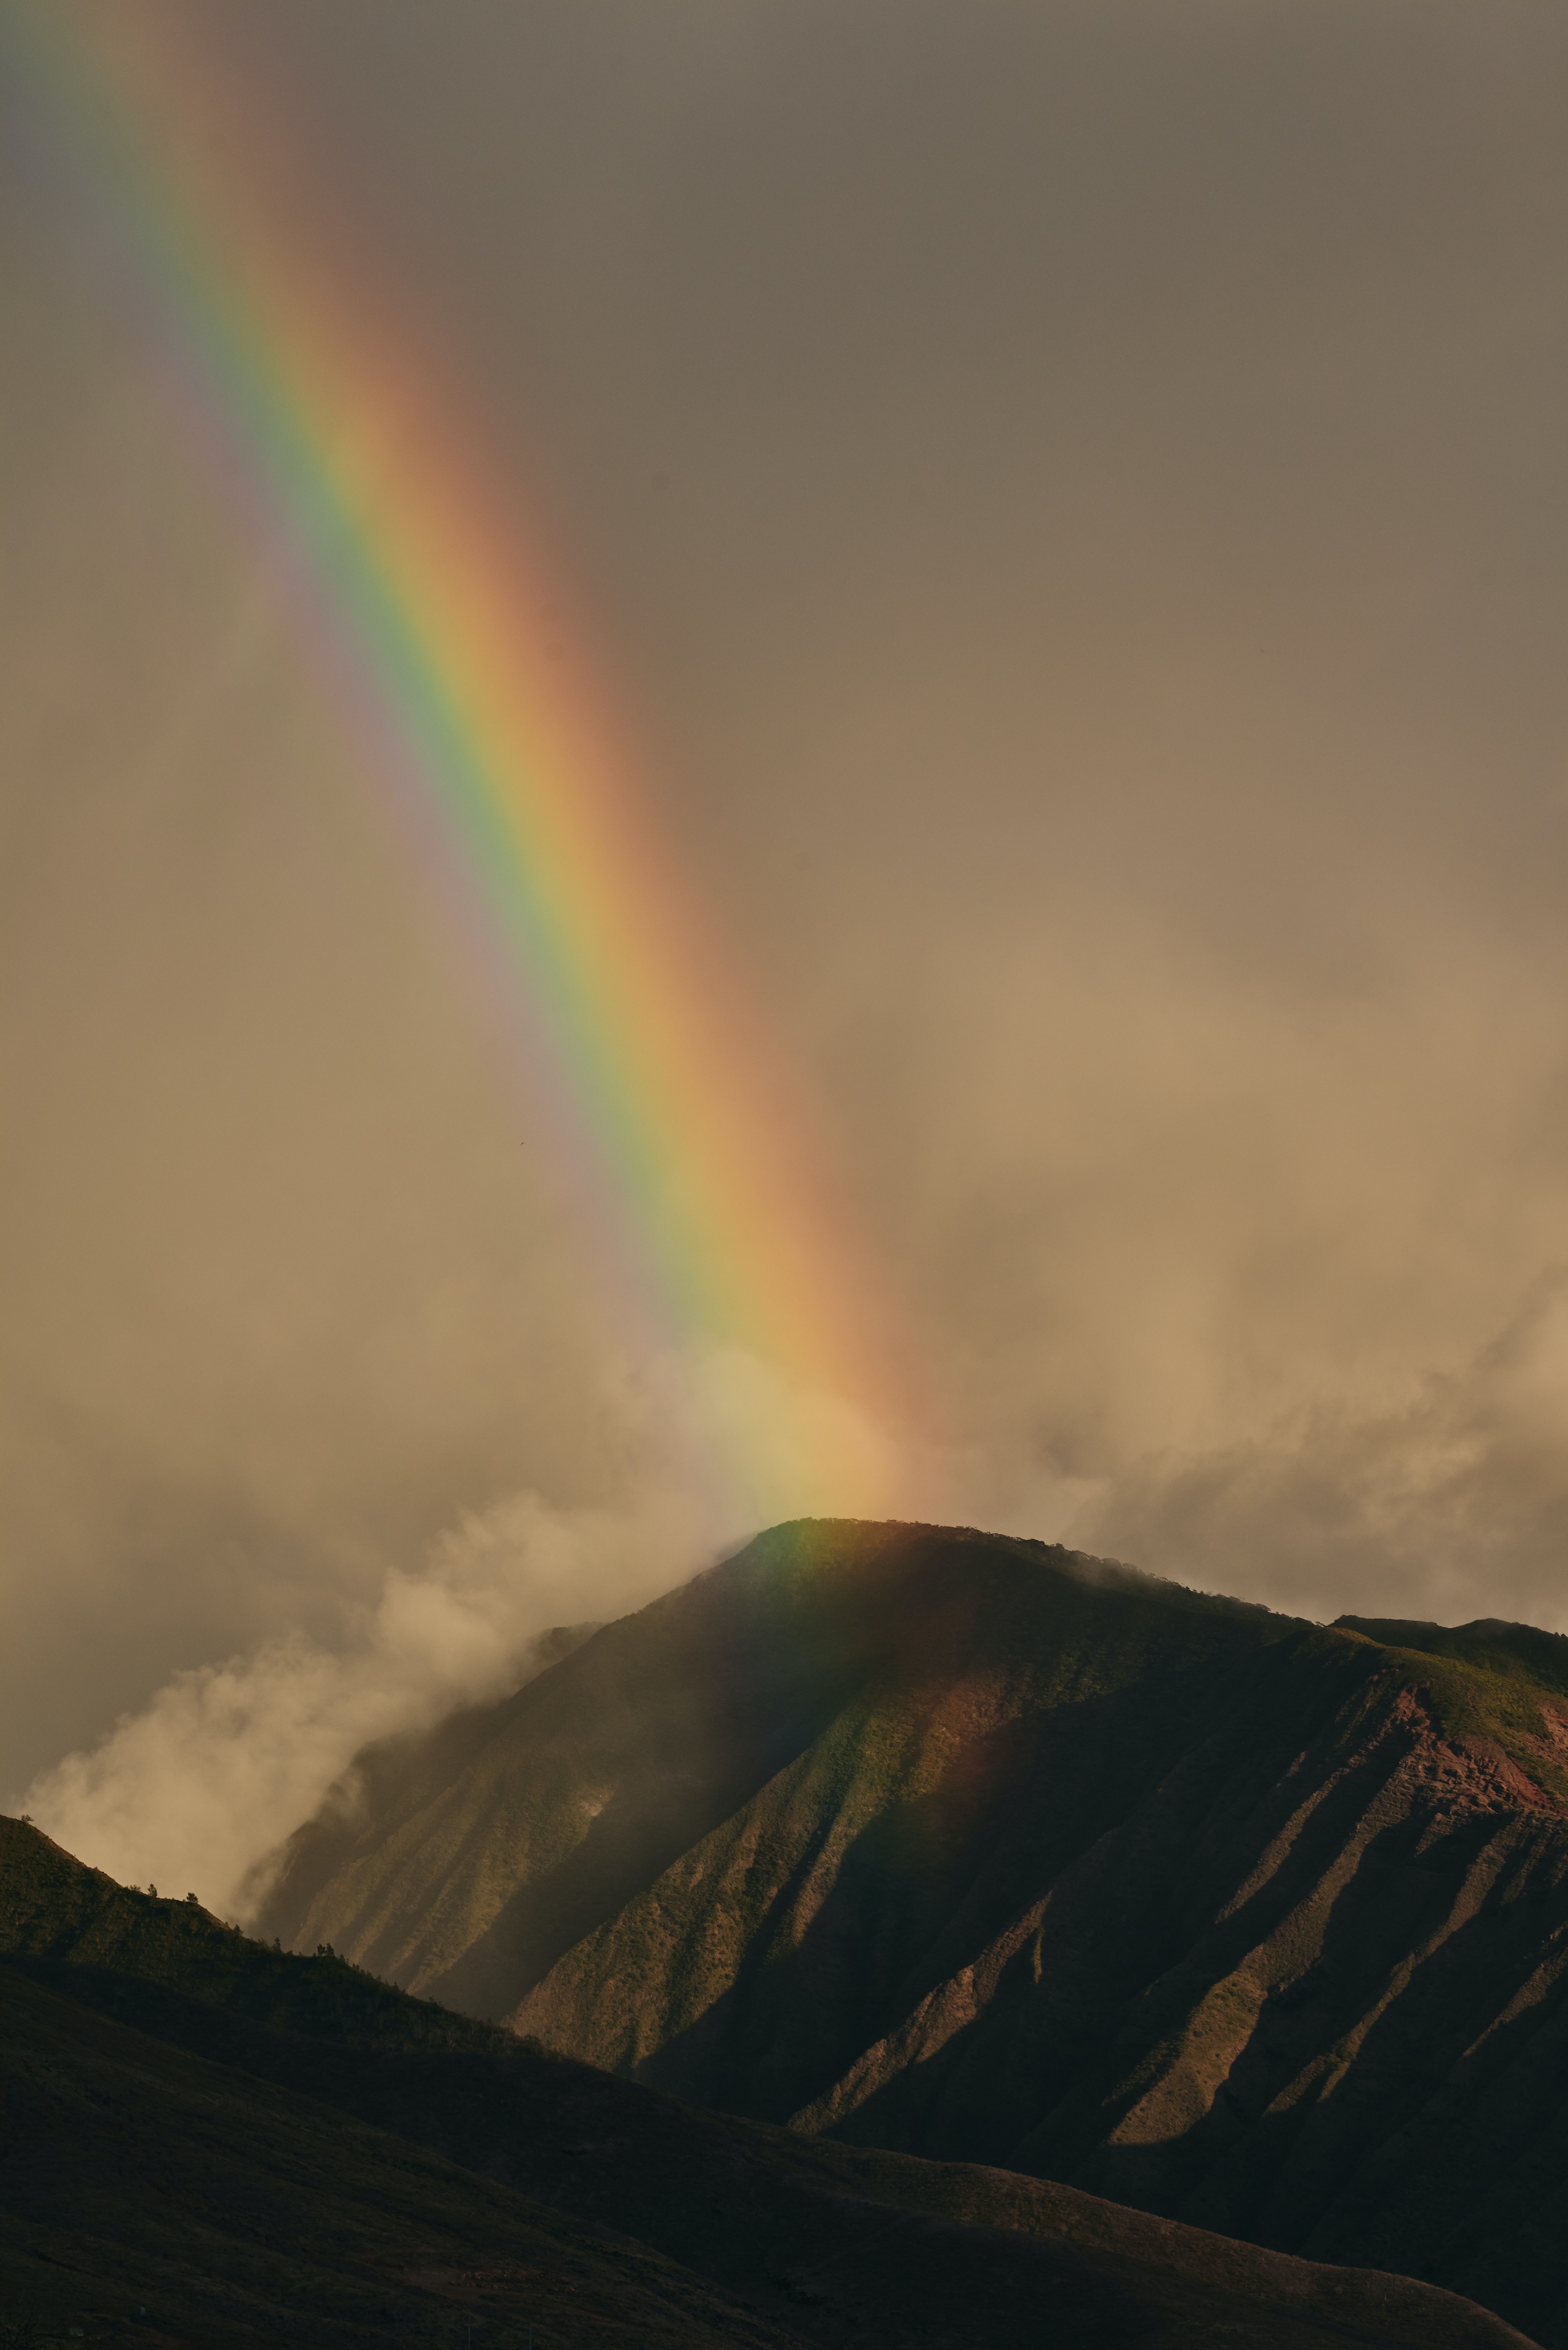 storm clouds and rainbow over mountains